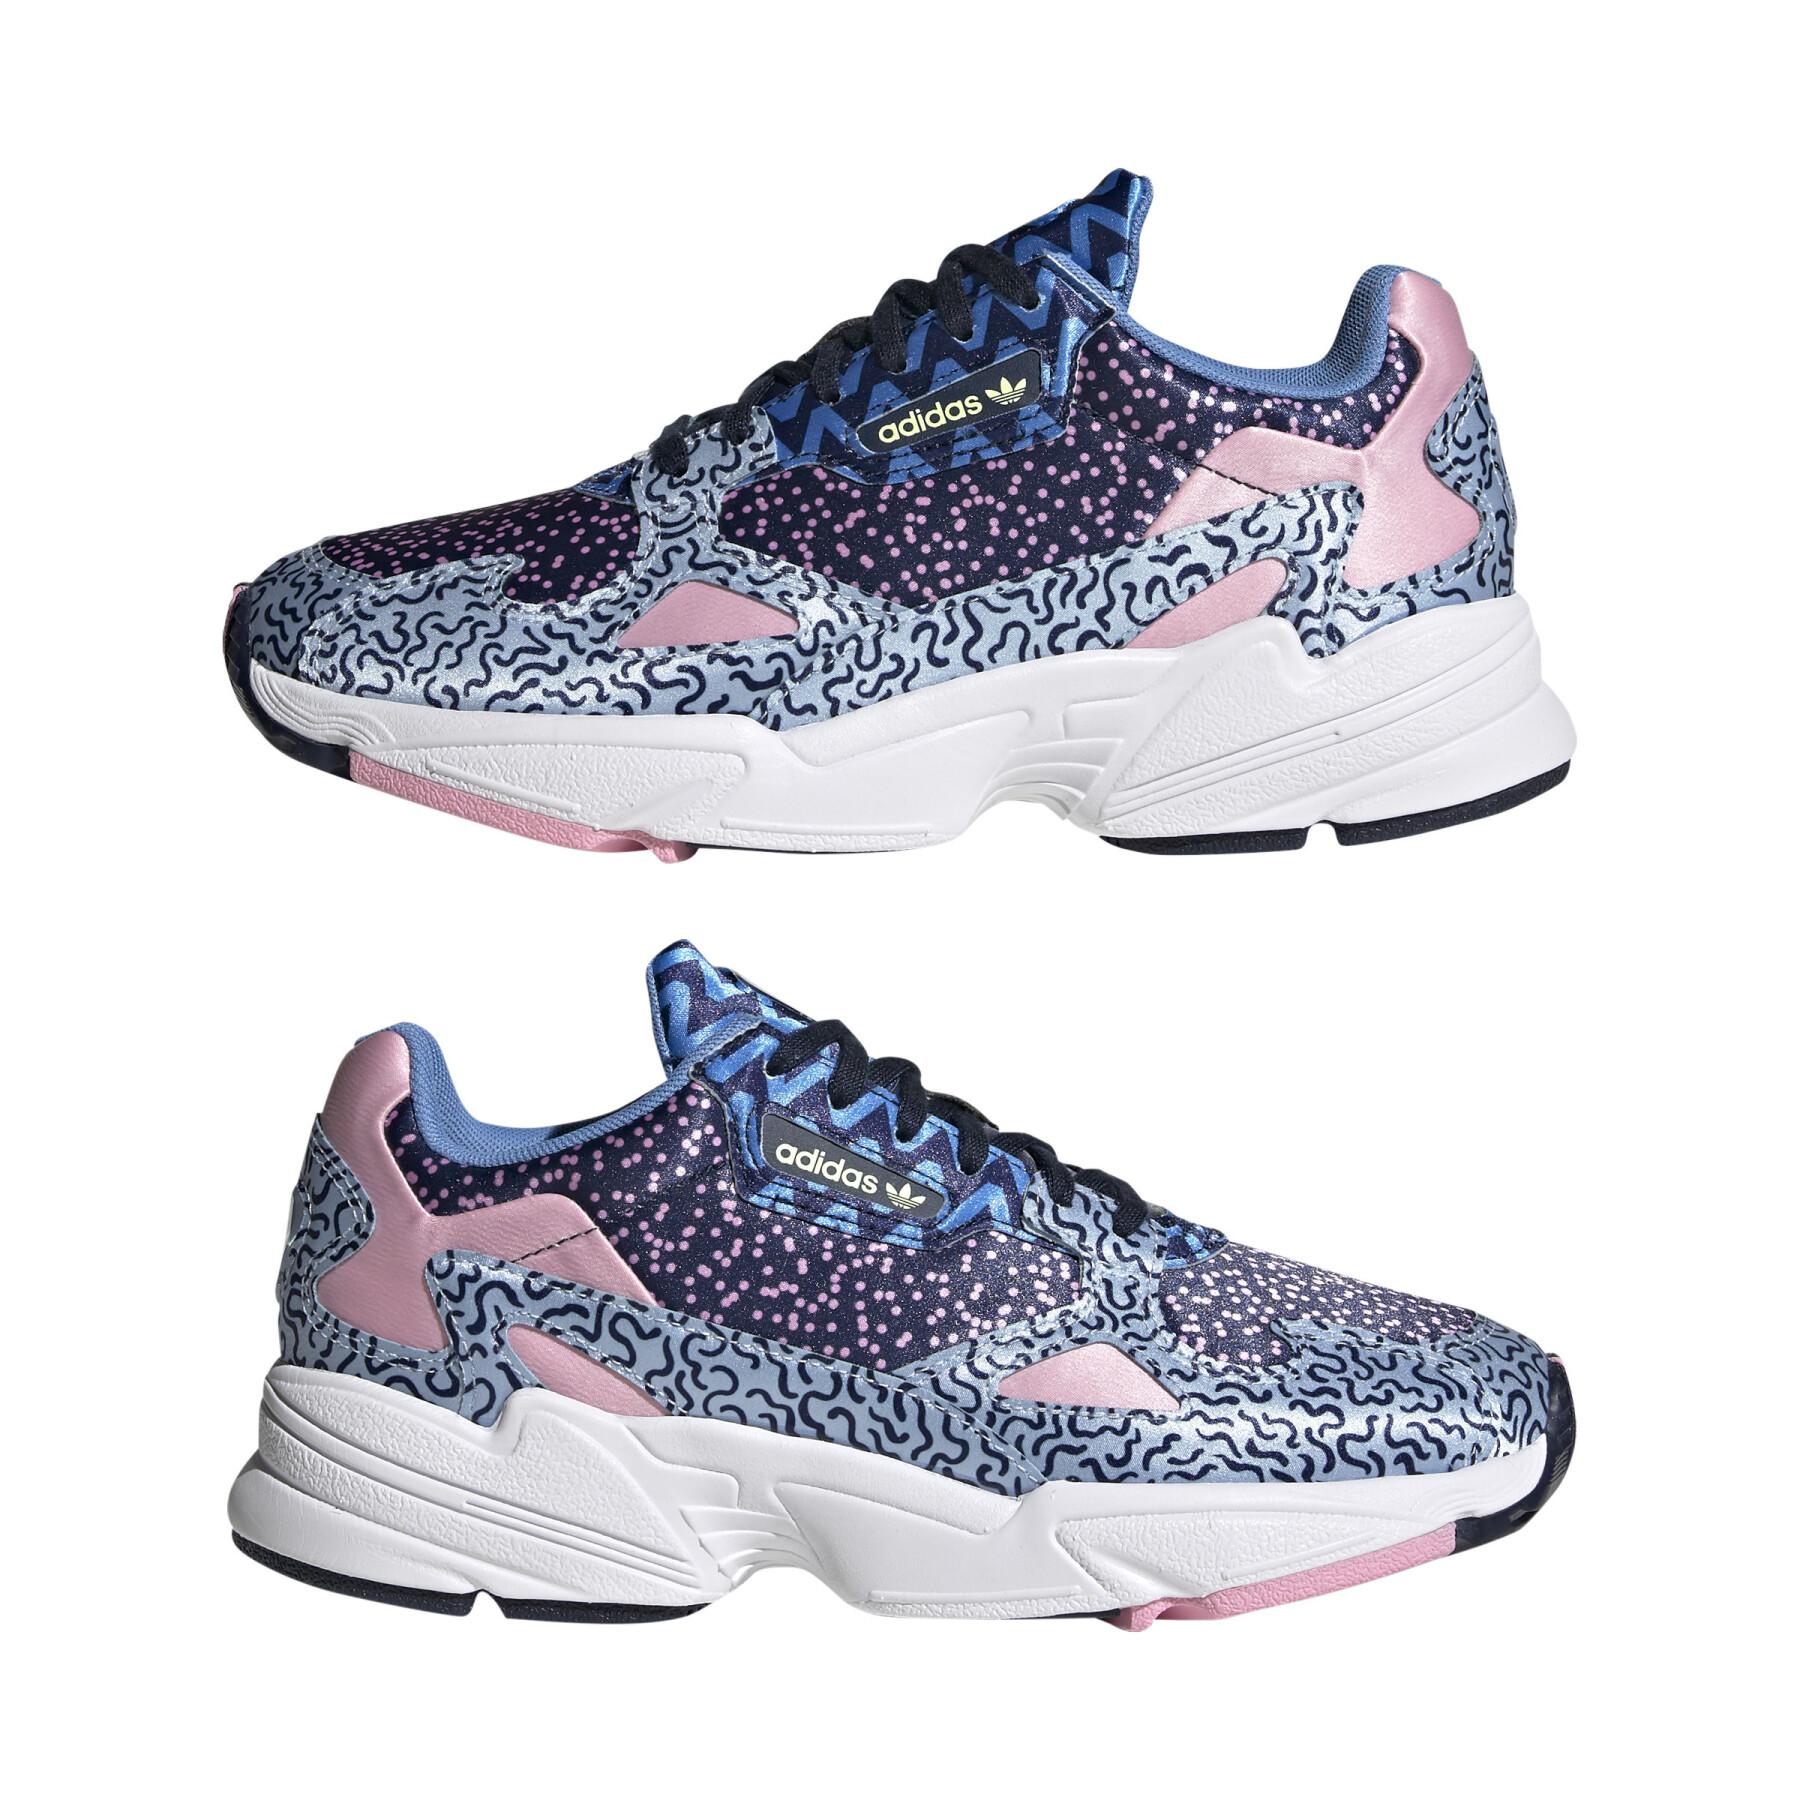 adidas adidas Falcon W low Women's Sneakers - Other - - Lifestyle